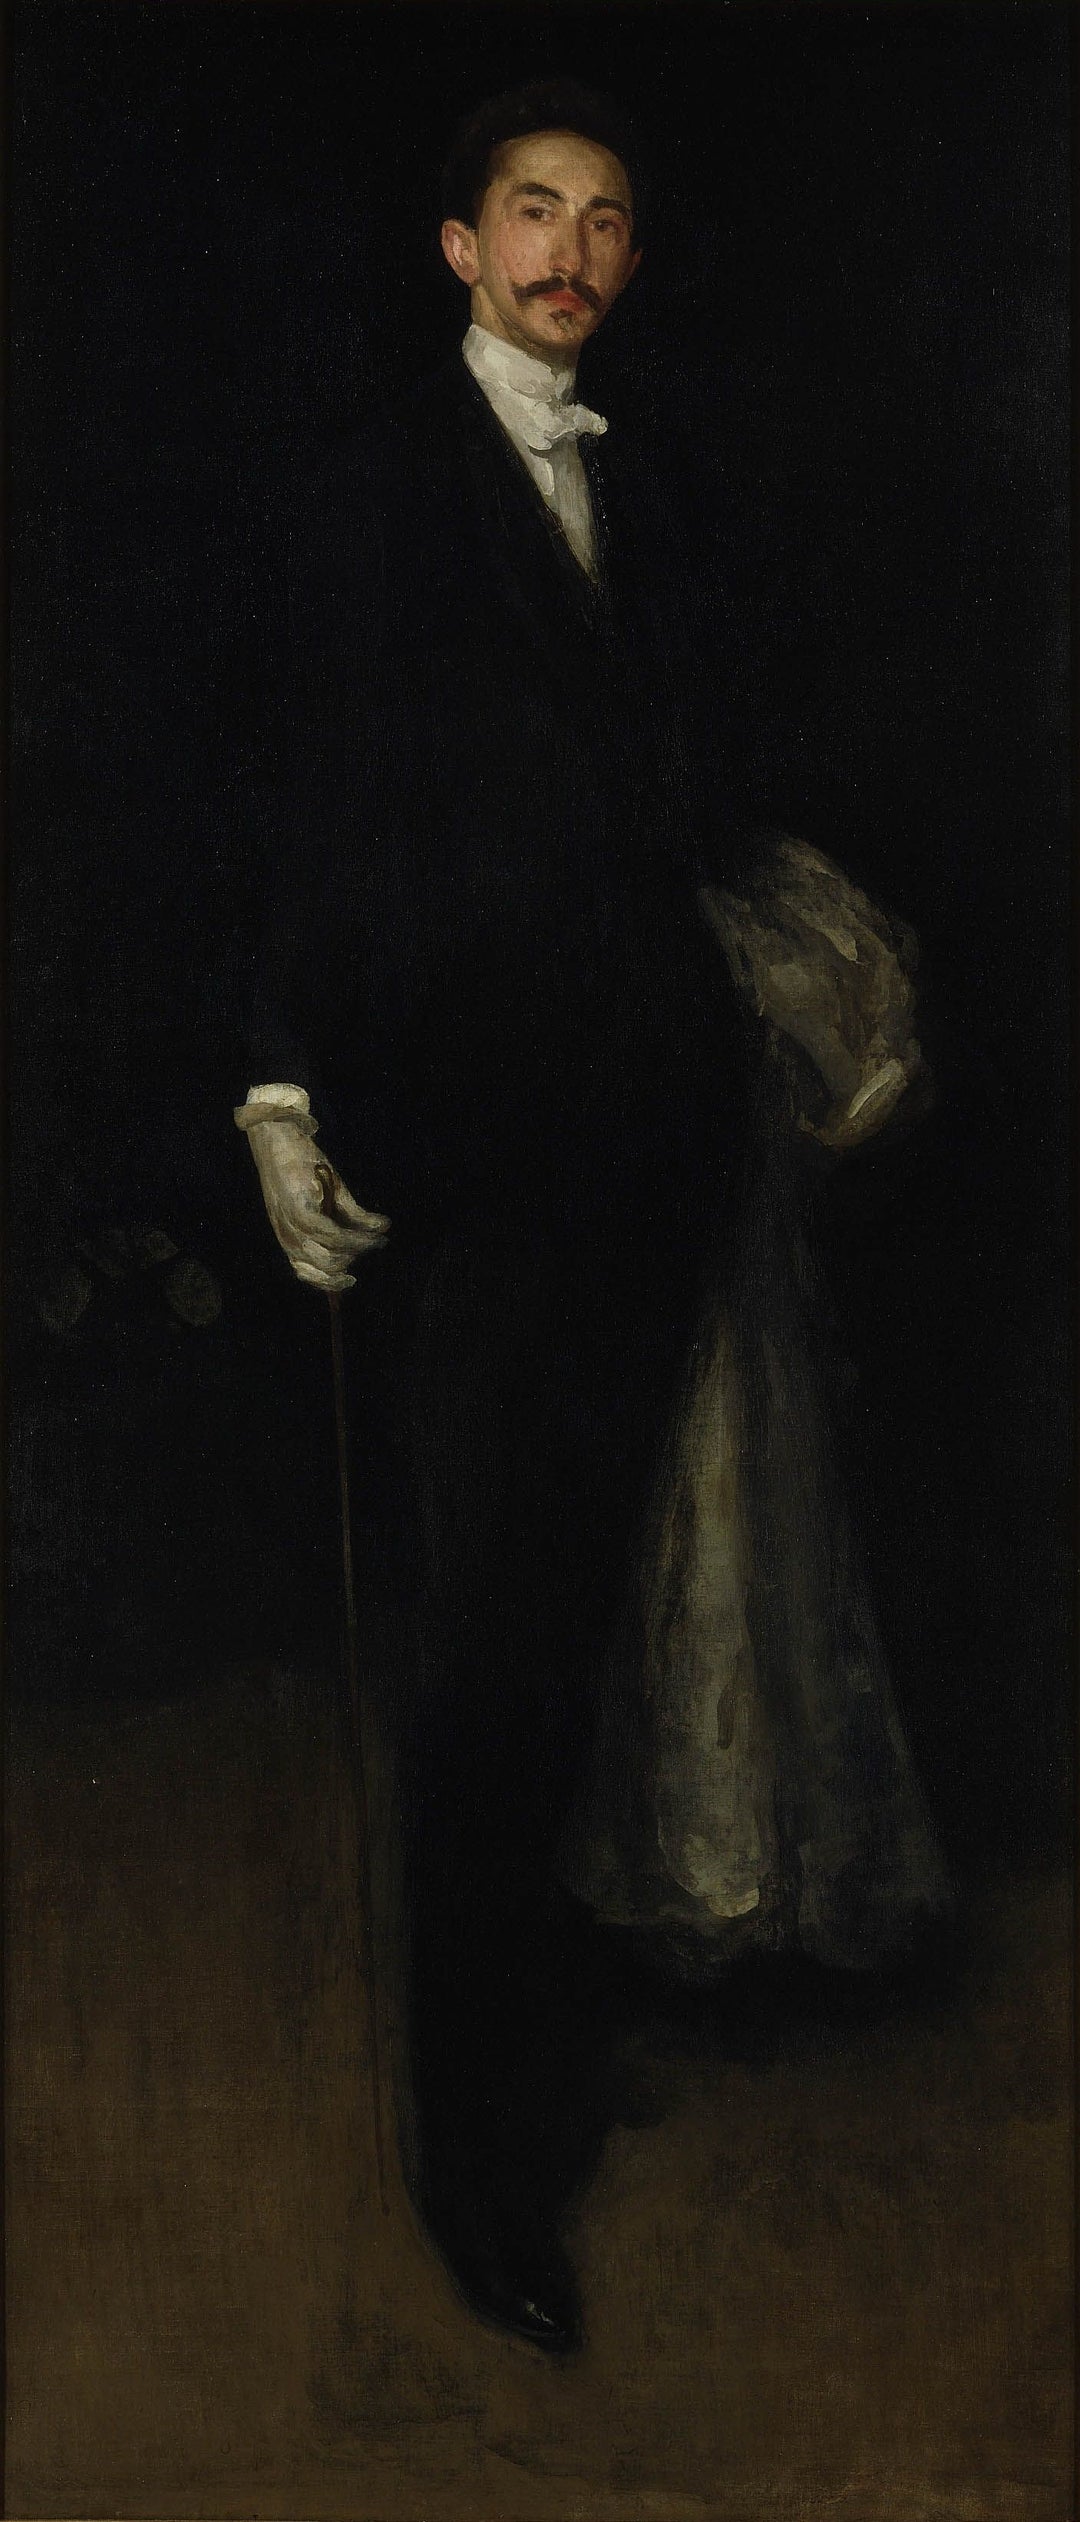 Arrangement in Black and Gold by James Abbott McNeill Whistler Reproduction Painting by Blue Surf Art